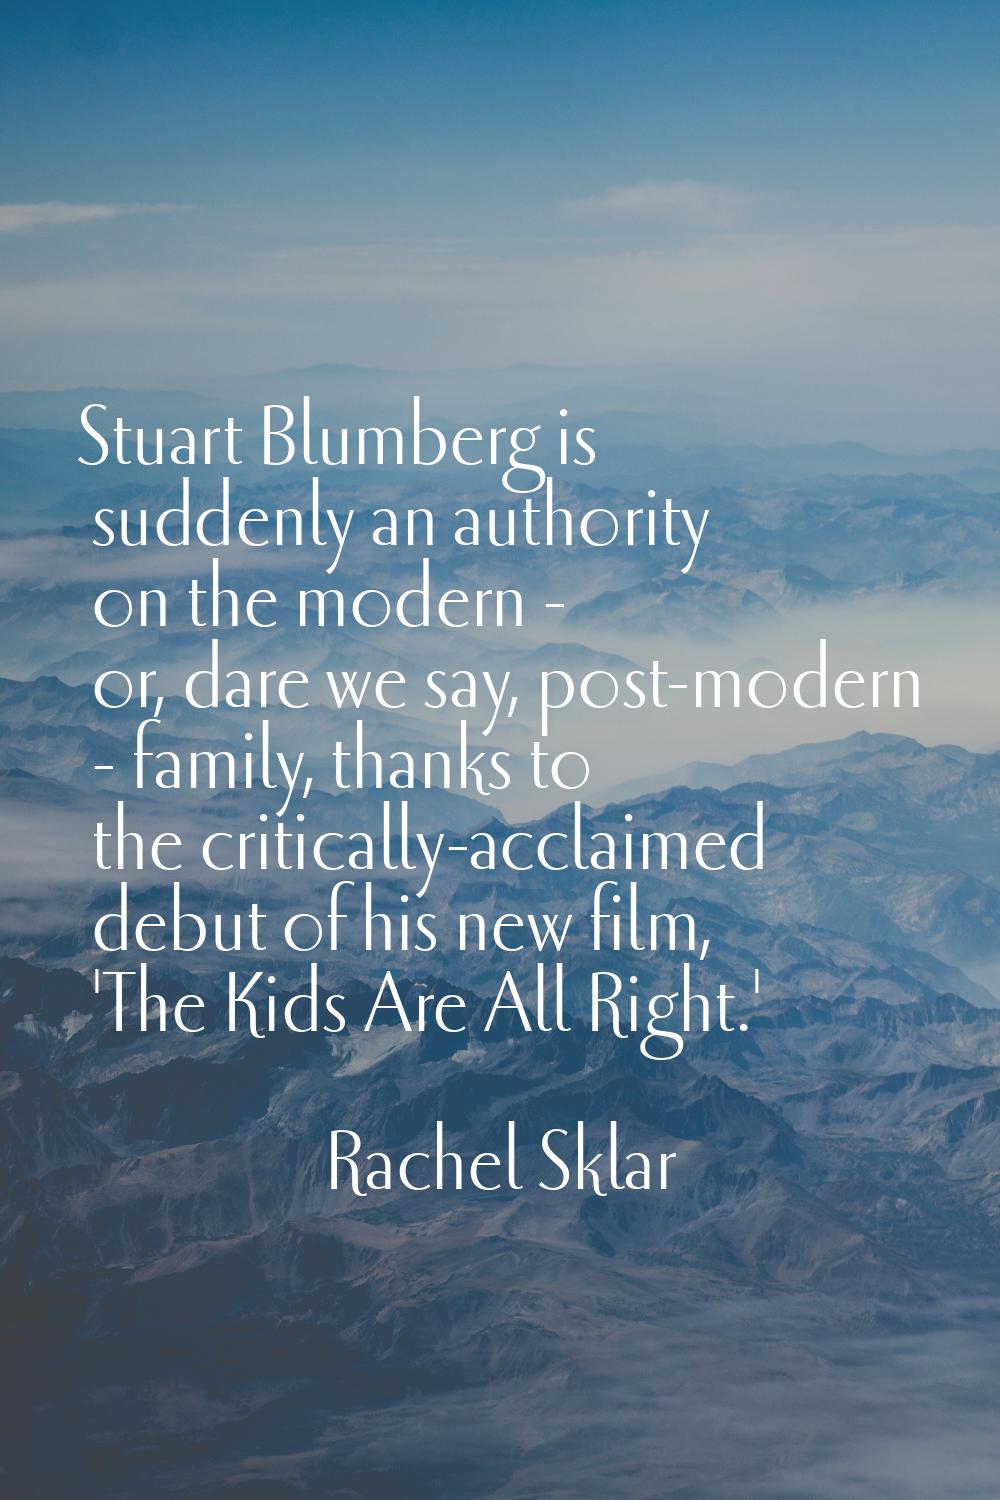 Stuart Blumberg is suddenly an authority on the modern - or, dare we say, post-modern - family, tha